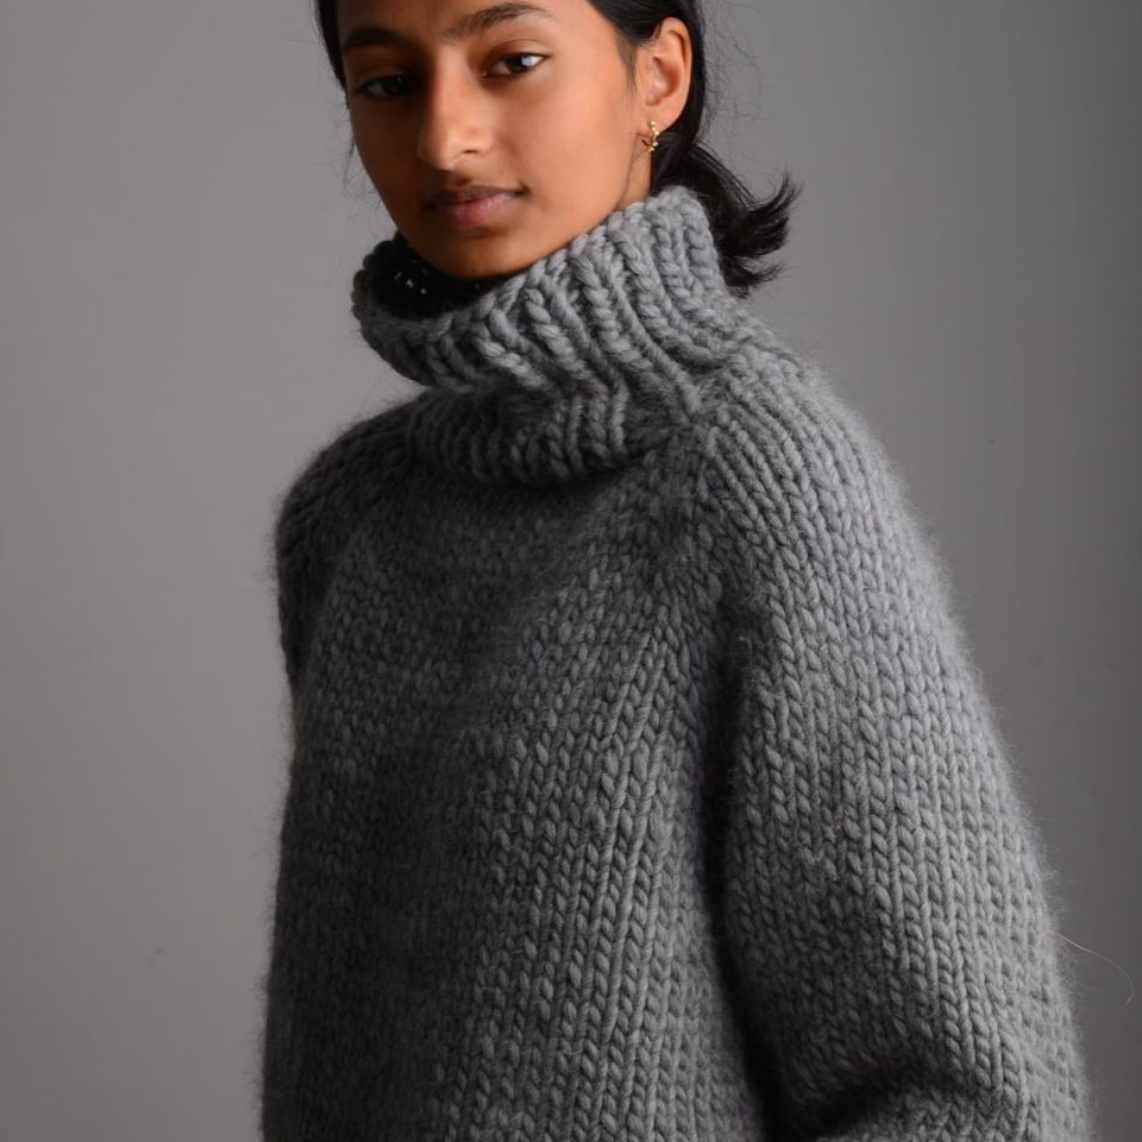 Chunky Boxy Jumper Pattern by Mrs Moon – Gilliangladrag